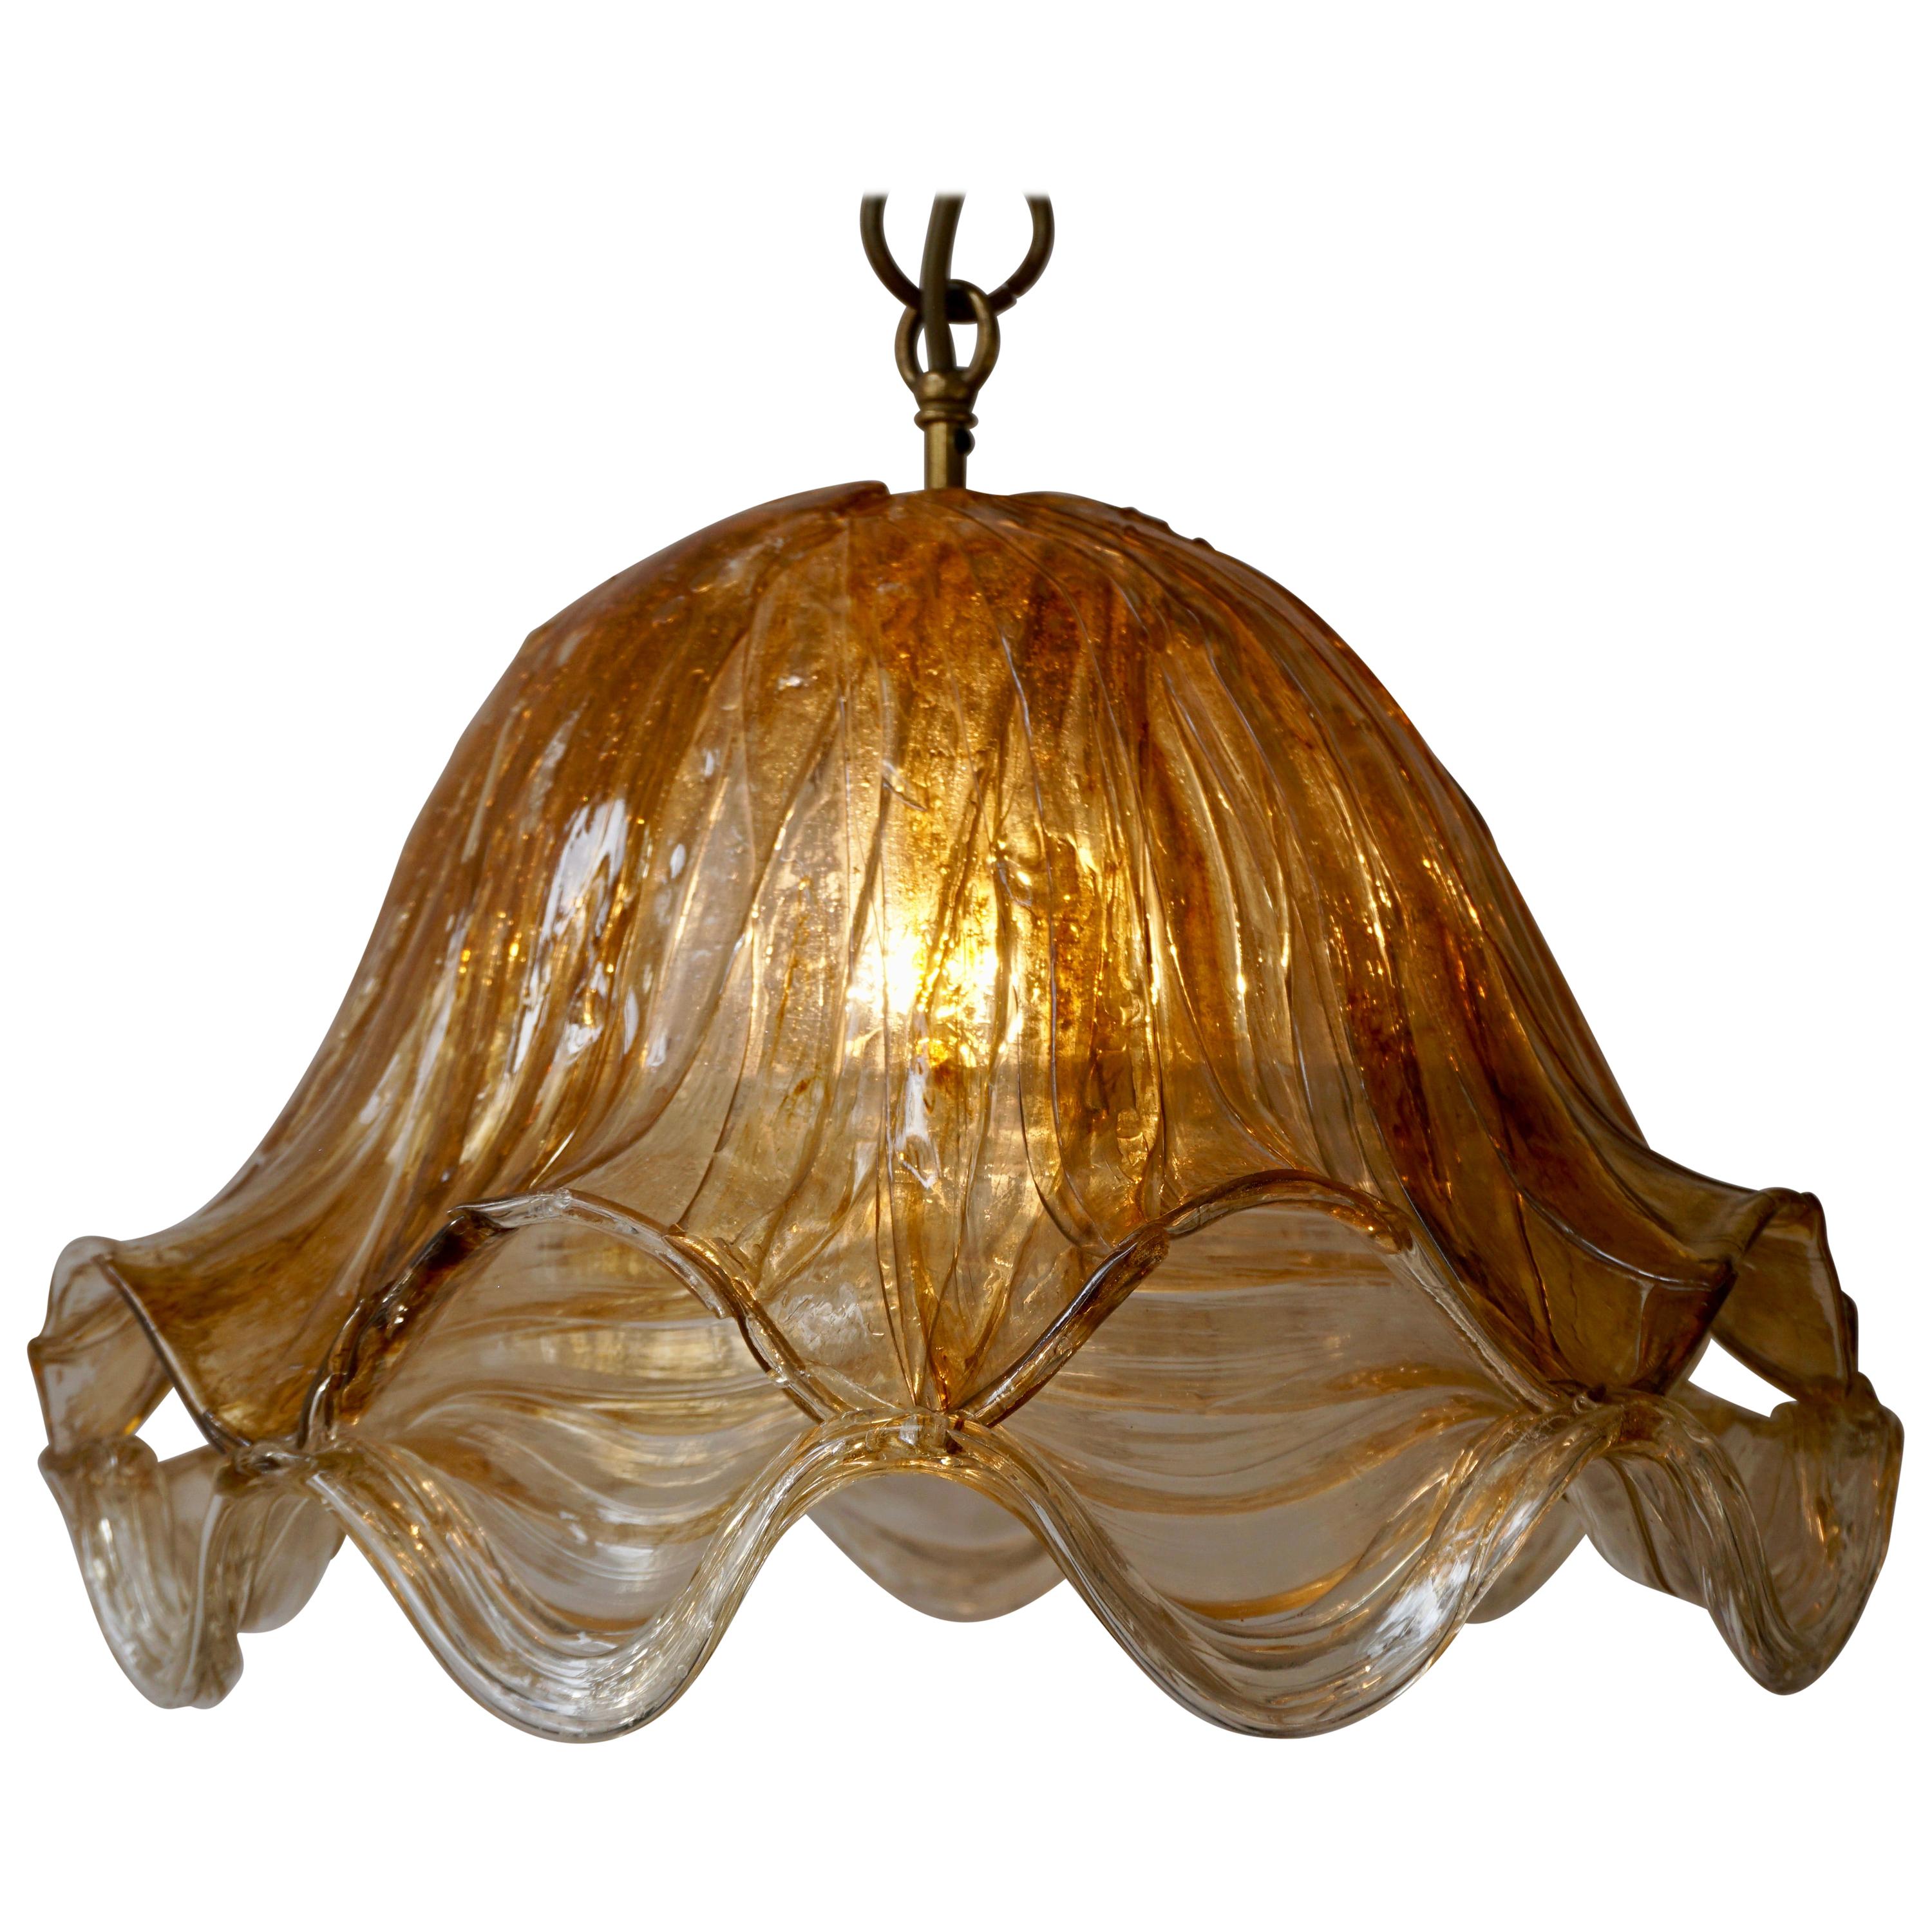 Brown and Transparent Acrylic Pendant Lamp, 1970s For Sale